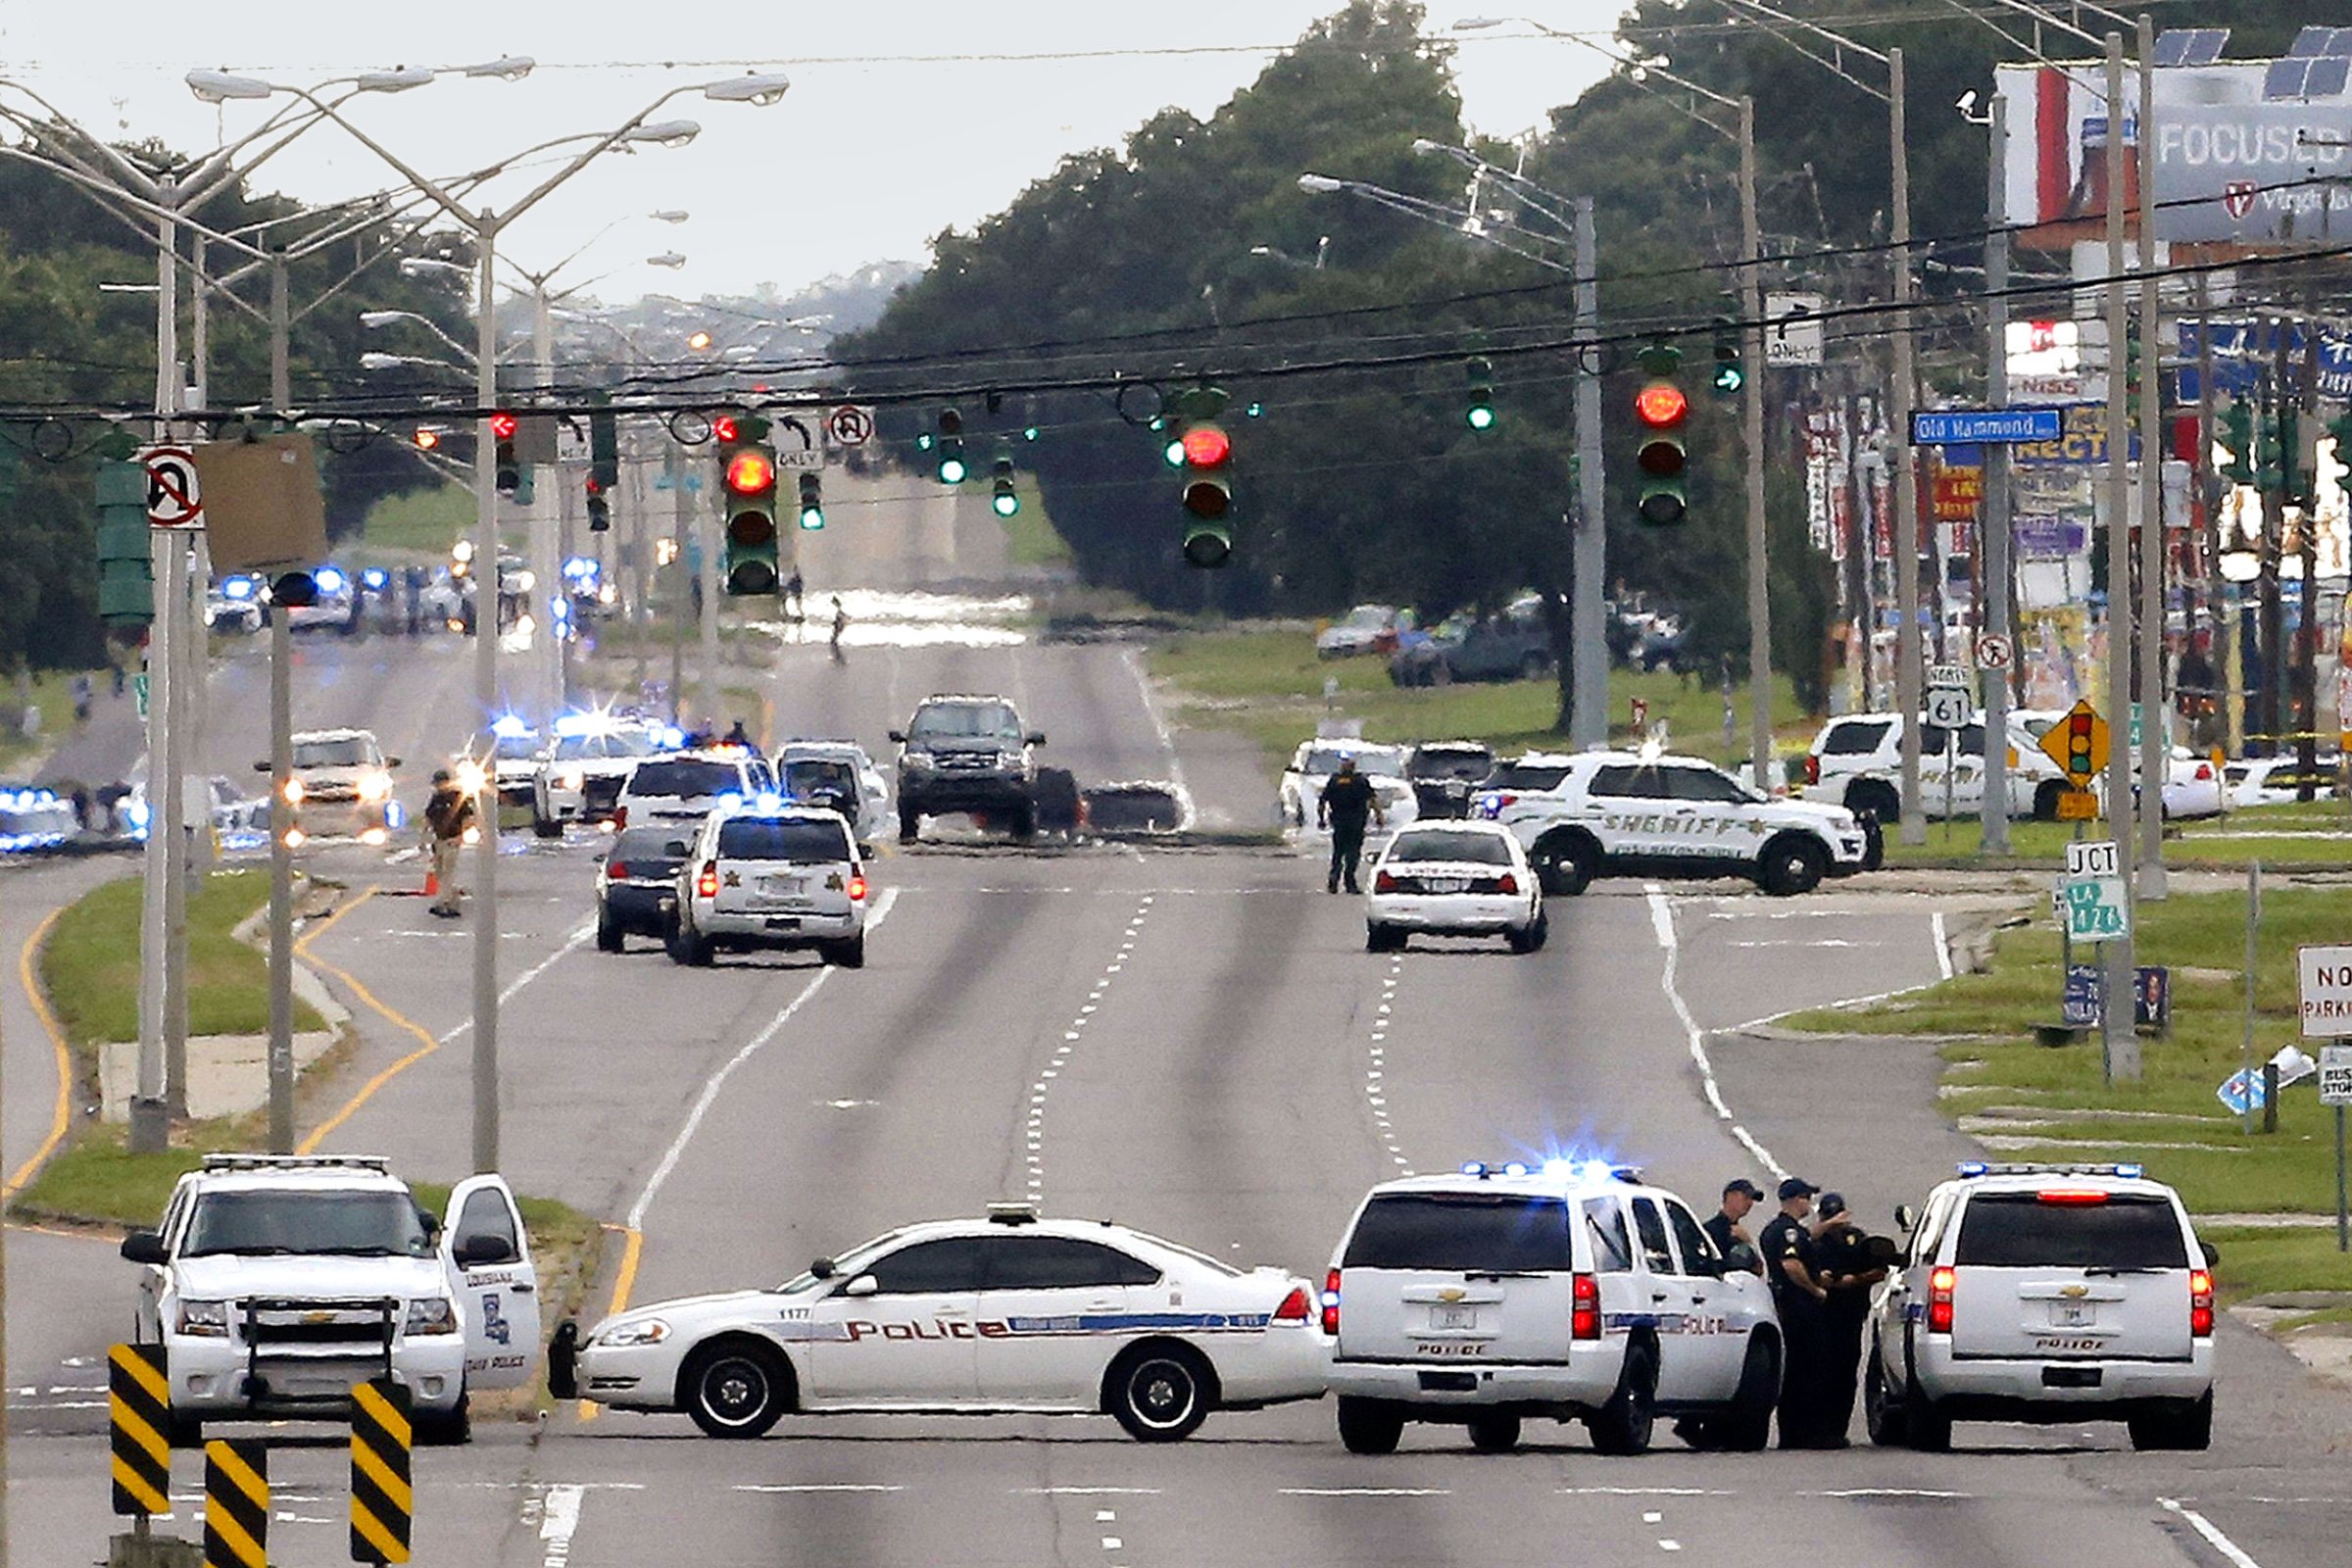 On July 17, police responded to the fatal shooting of three officers in Baton Rouge